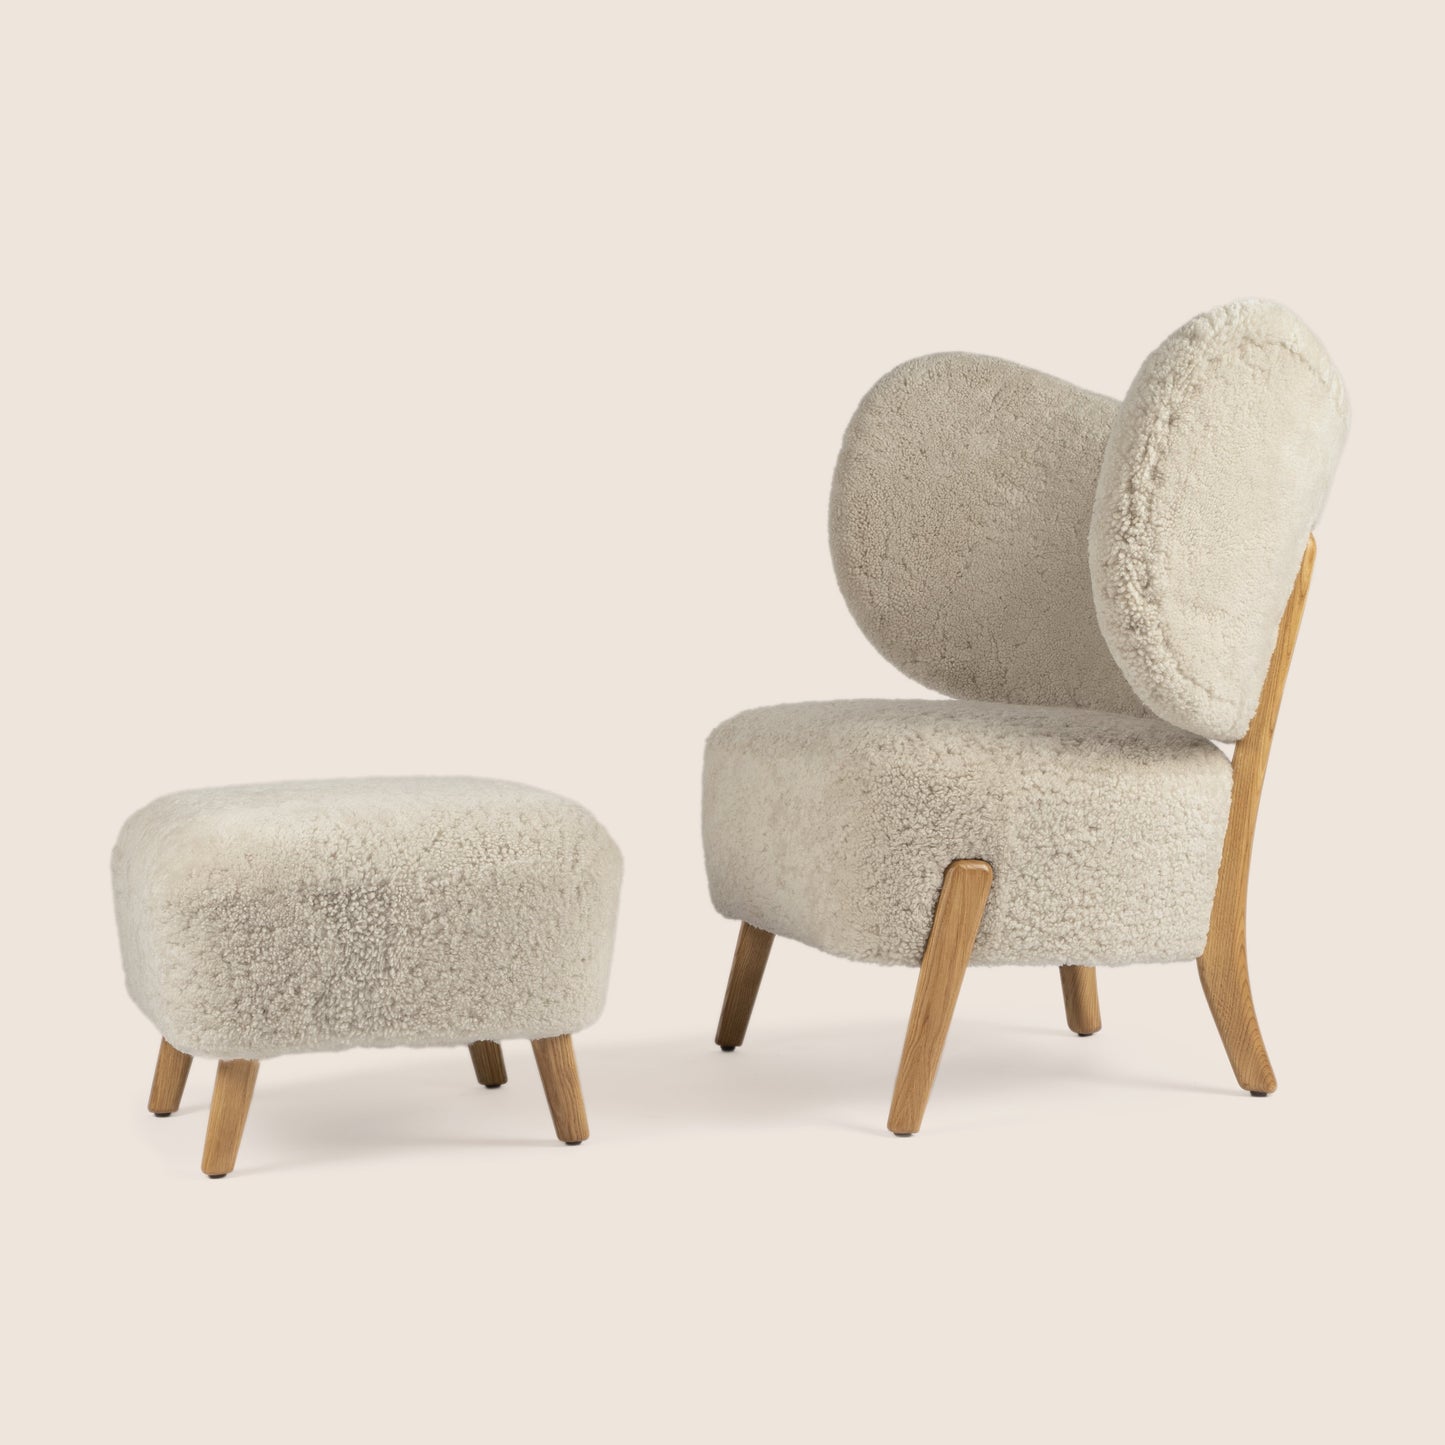 TMBO Lounge in Sheepskin with pouf